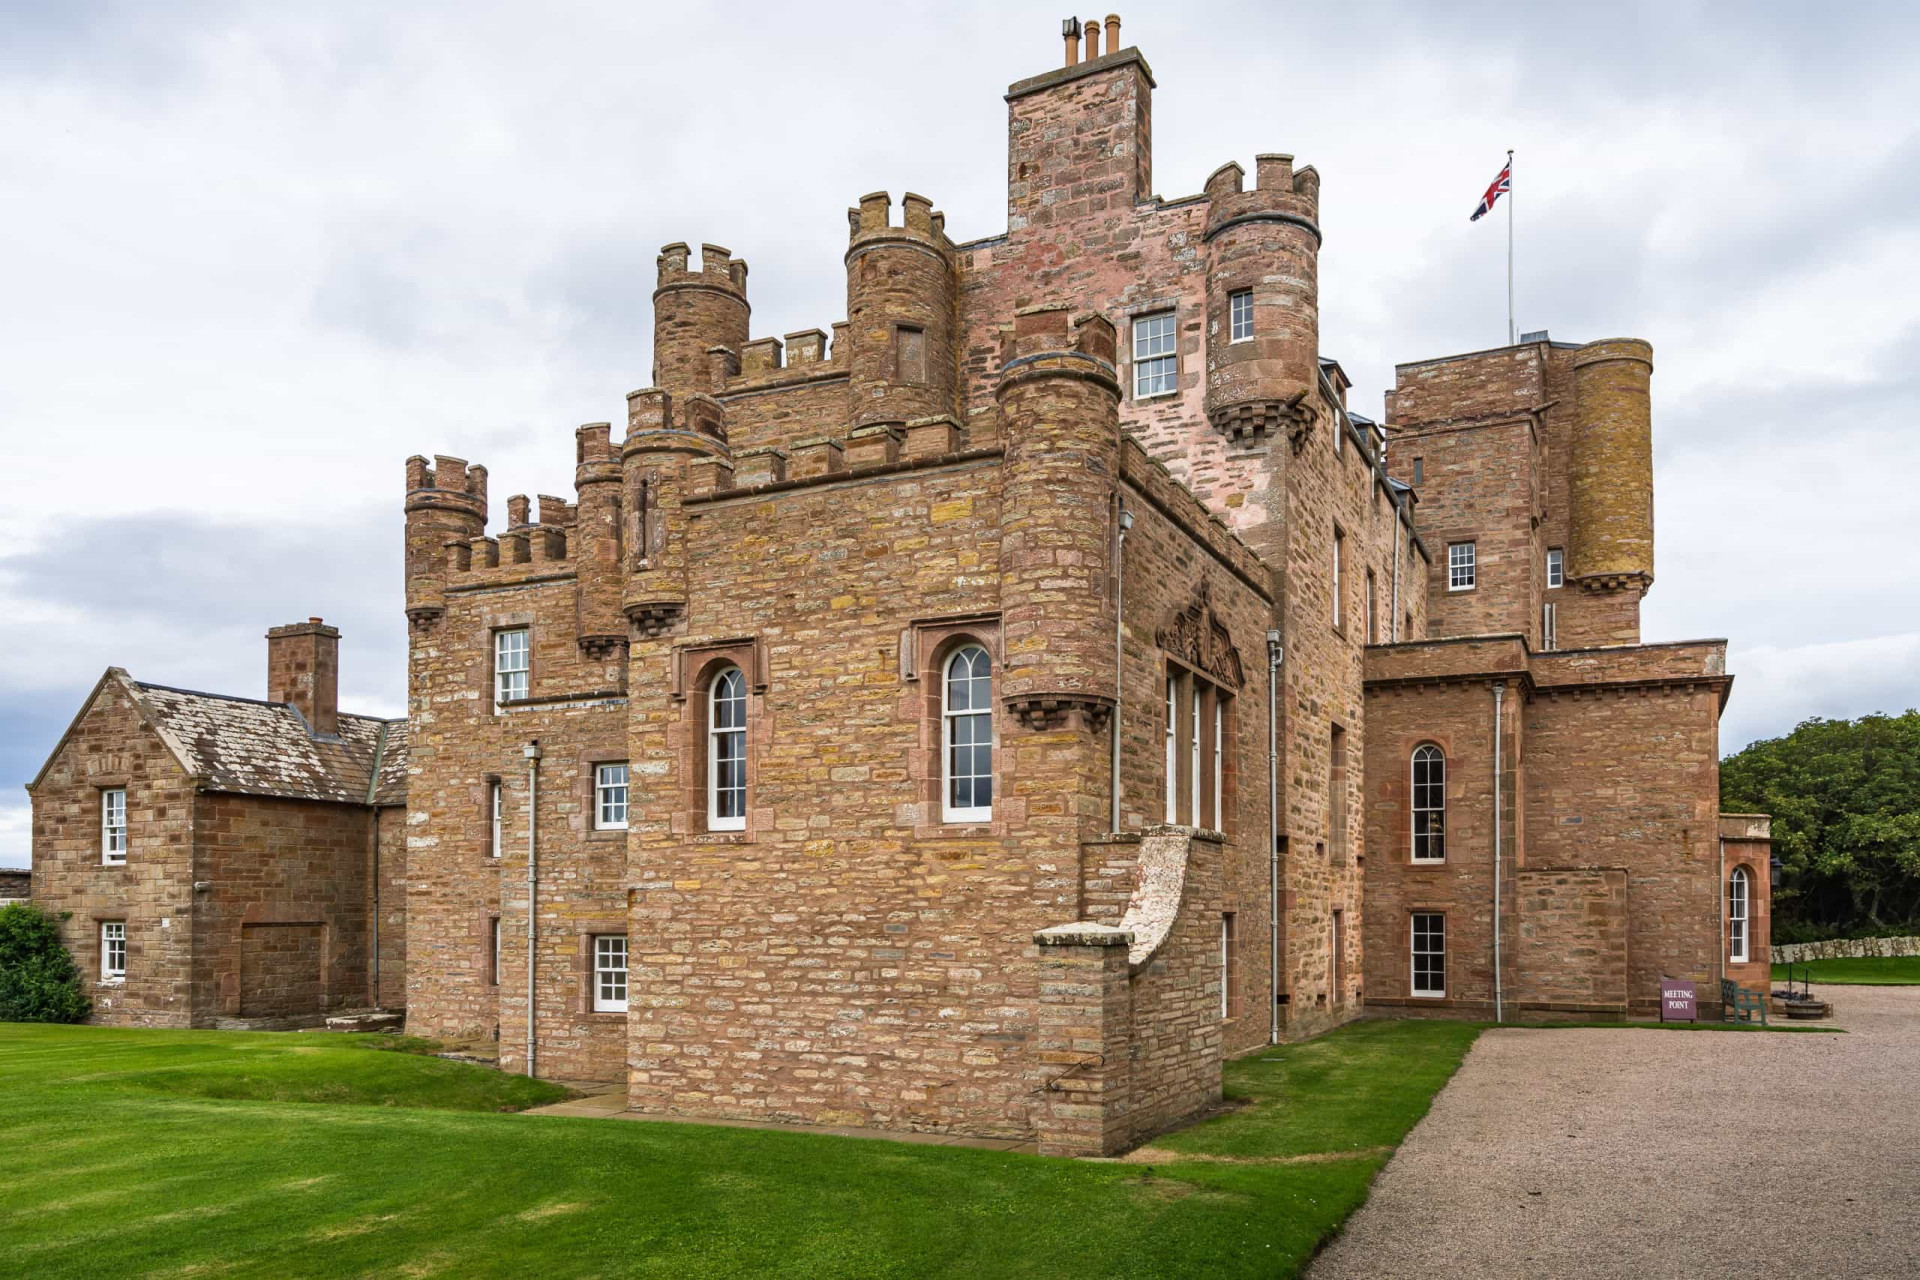 <p>Staff at the castle say it is haunted by the lovelorn figure of Lady Fanny, daughter of the 14th Earl of Caithness. When she fell in love with a local farmhand, her father banished him from the grounds and sent his daughter to the top floor, where her lonely ghost remains.</p><p><a href="https://www.msn.com/en-ca/community/channel/vid-7xx8mnucu55yw63we9va2gwr7uihbxwc68fxqp25x6tg4ftibpra?cvid=94631541bc0f4f89bfd59158d696ad7e">Follow us and access great exclusive content every day</a></p>